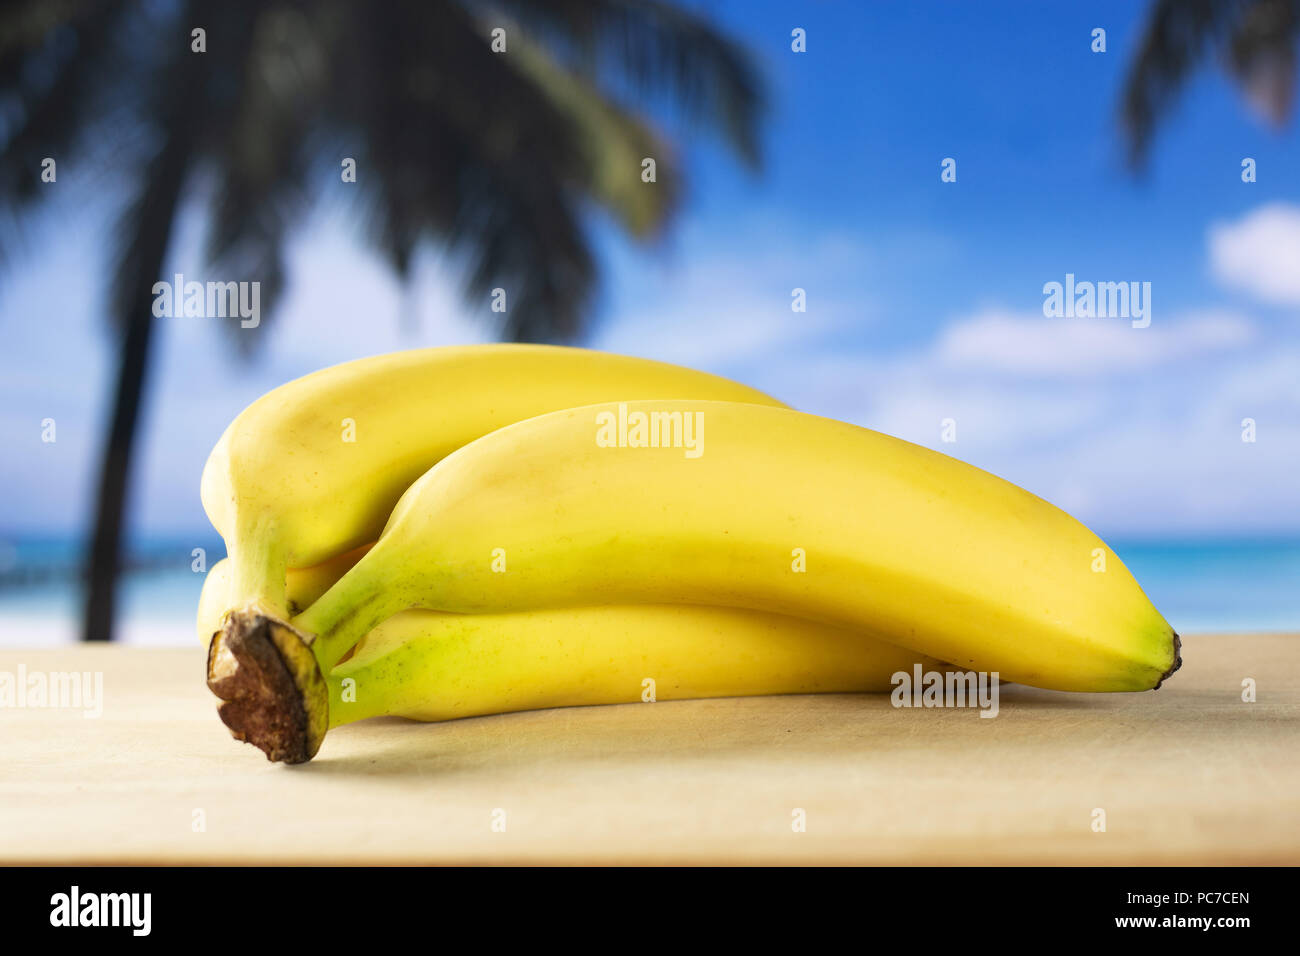 Group of four whole fresh yellow banana one ripe cluster with palm trees on the beach in background Stock Photo